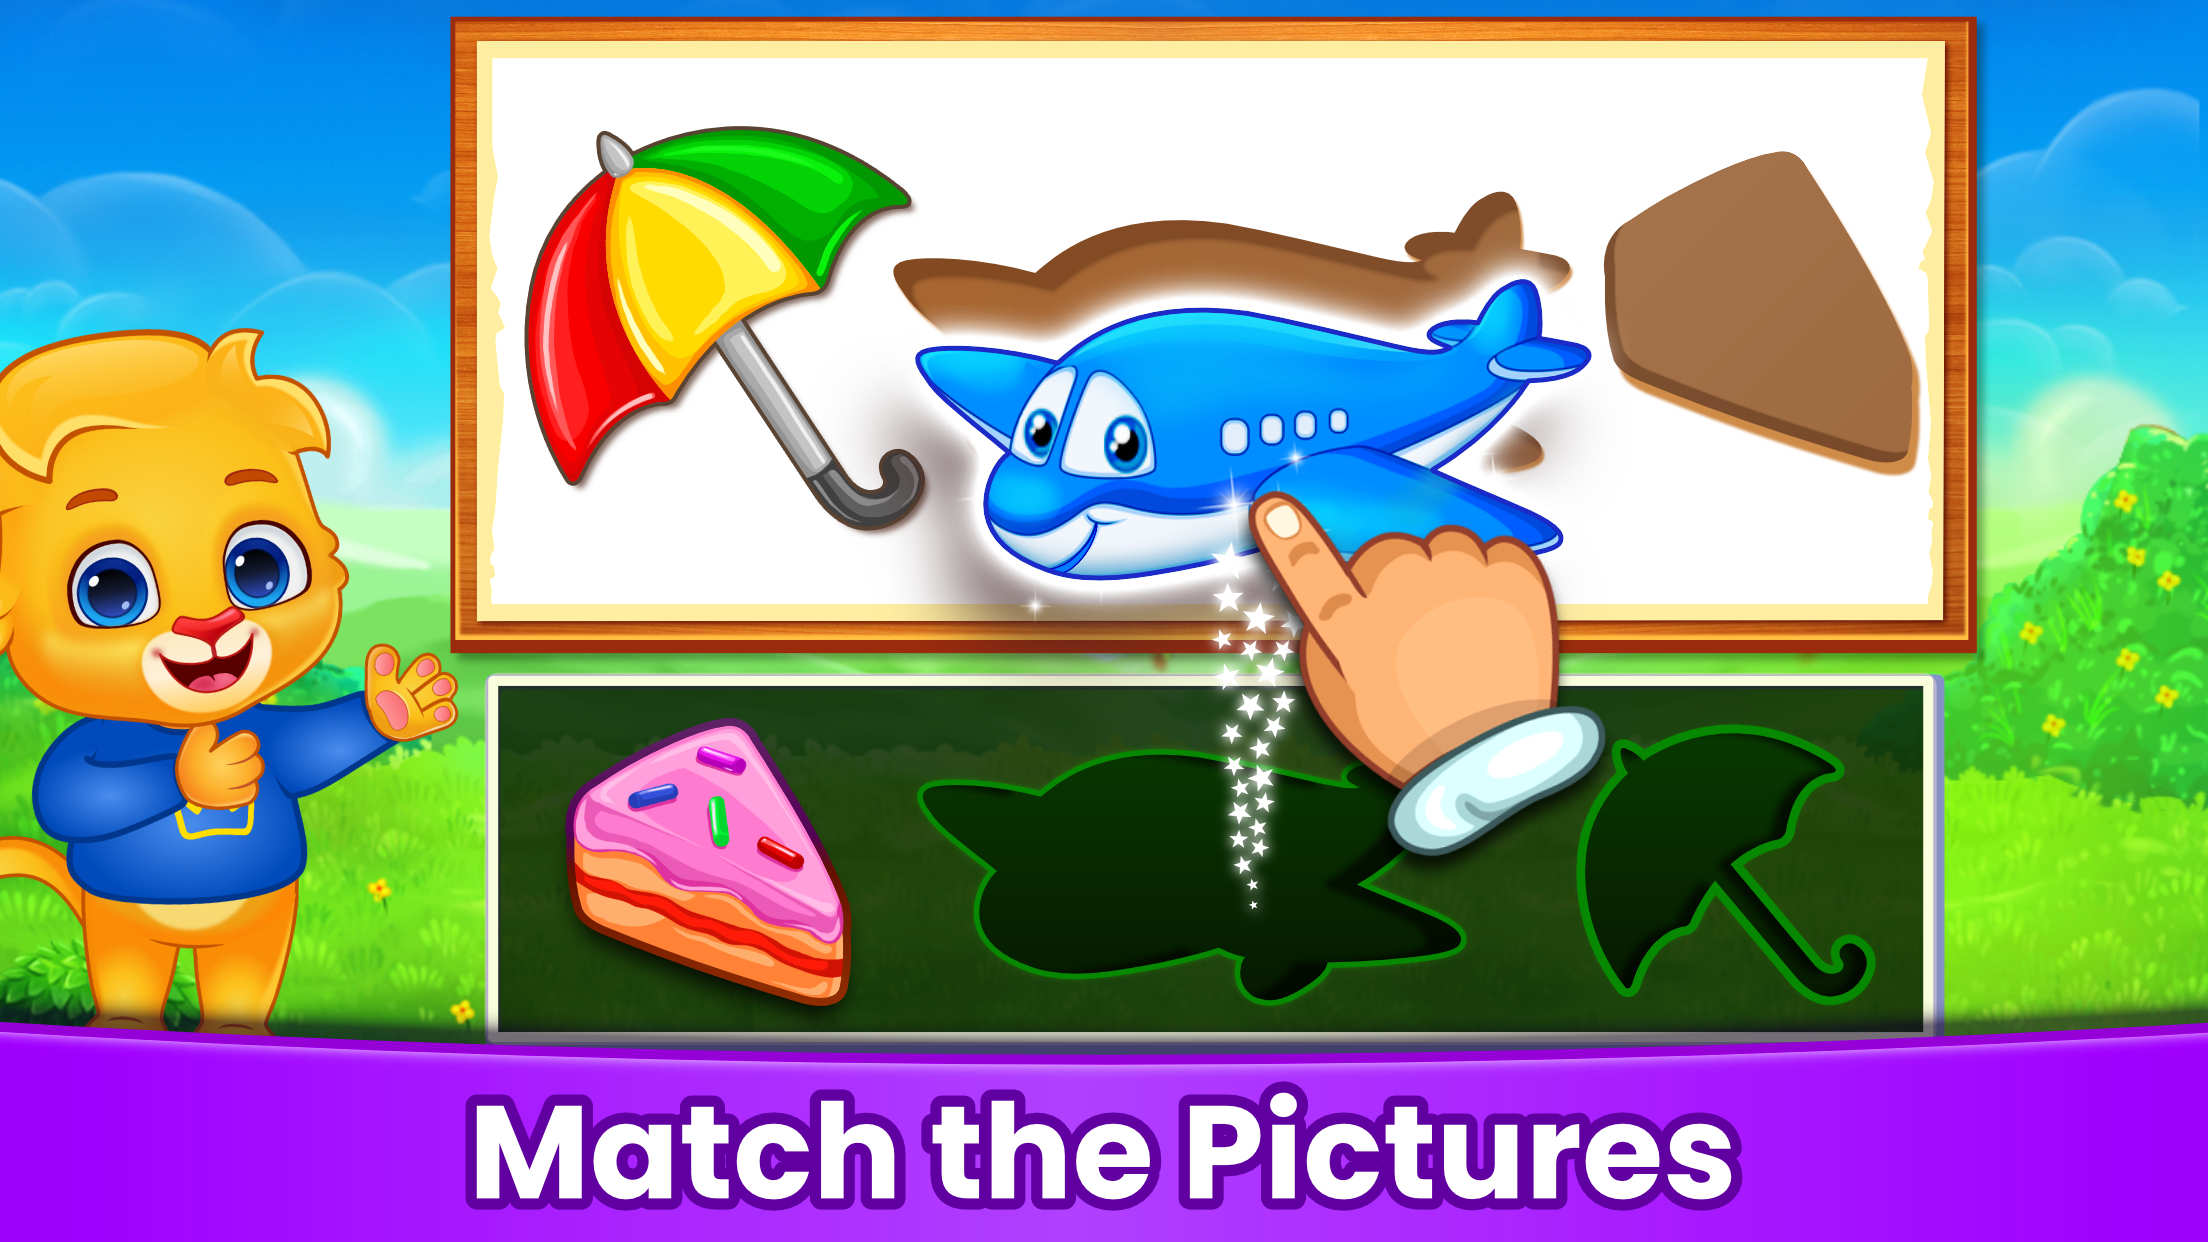 Puzzle Kids - Animals Shapes and Jigsaw Puzzles 1